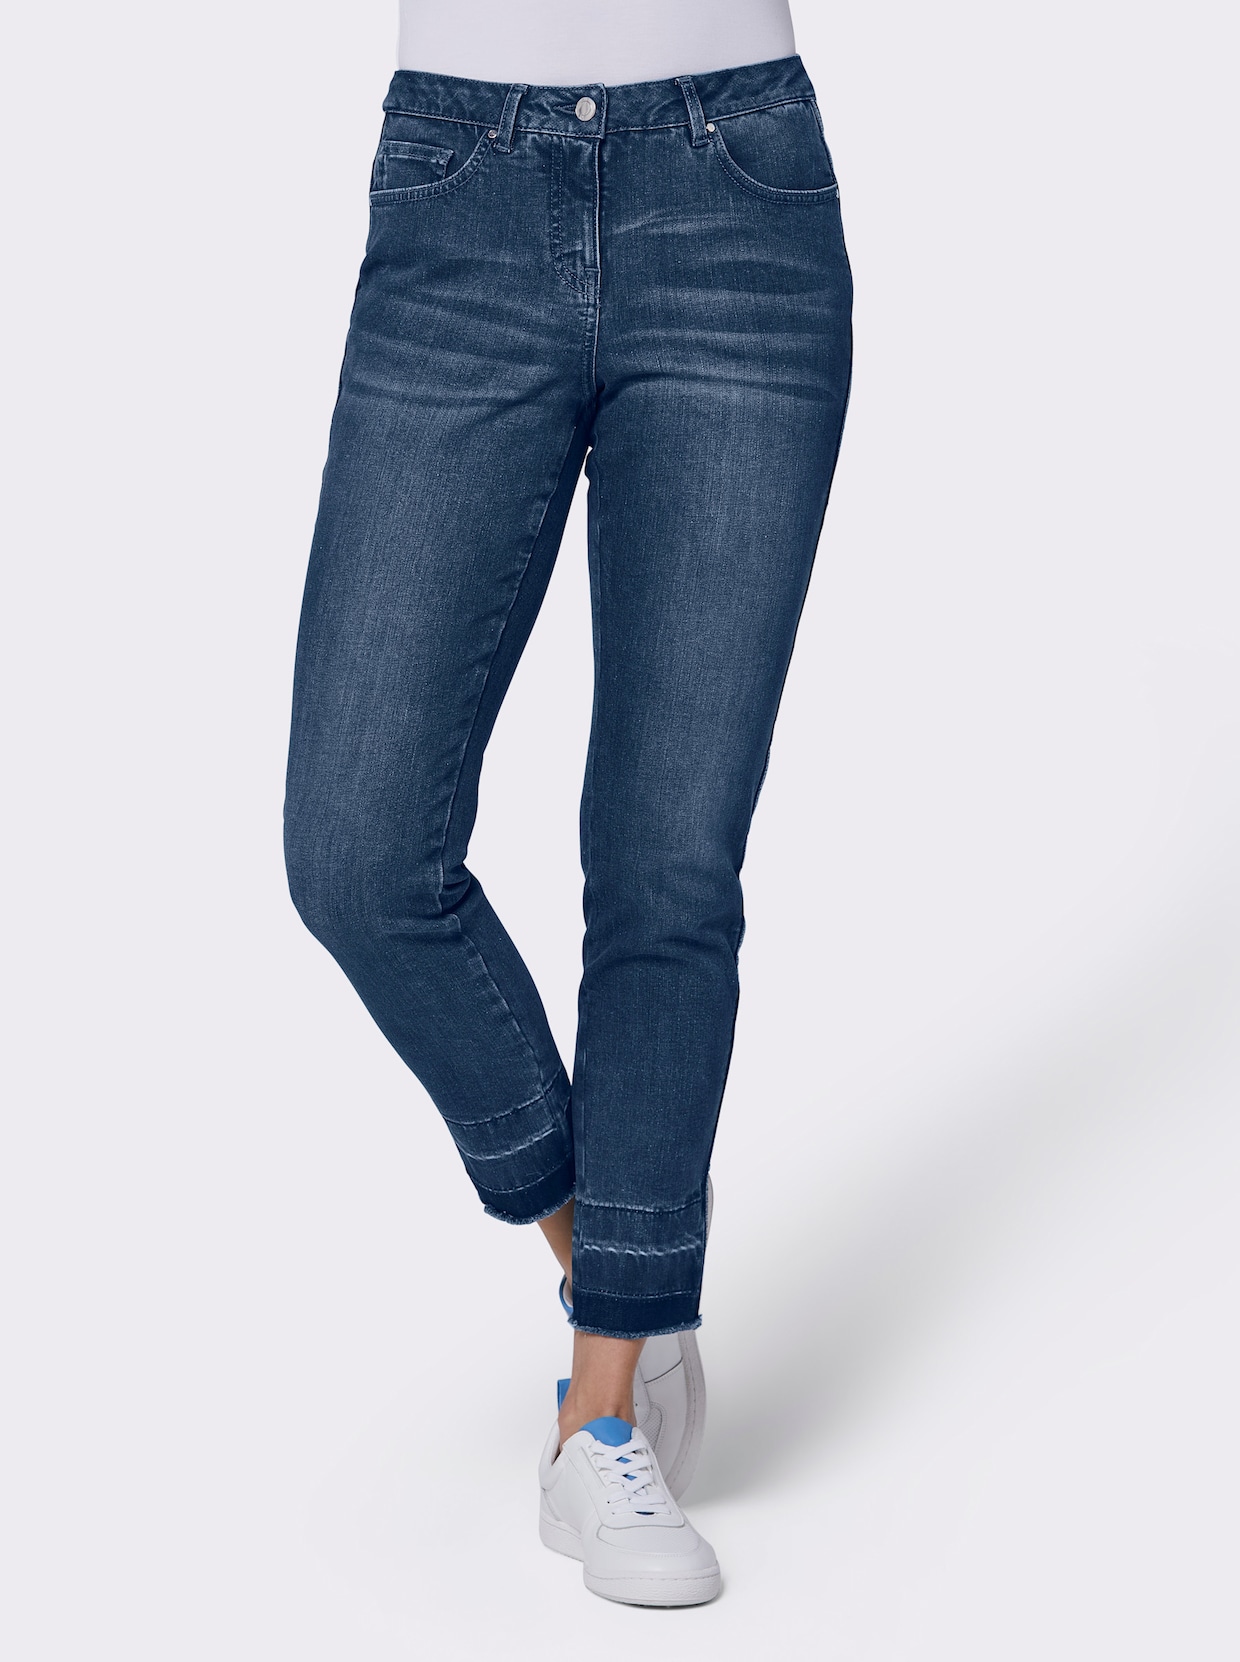 Creation L Premium Baumwoll-Lyocell-Jeans - blue-stone-washed